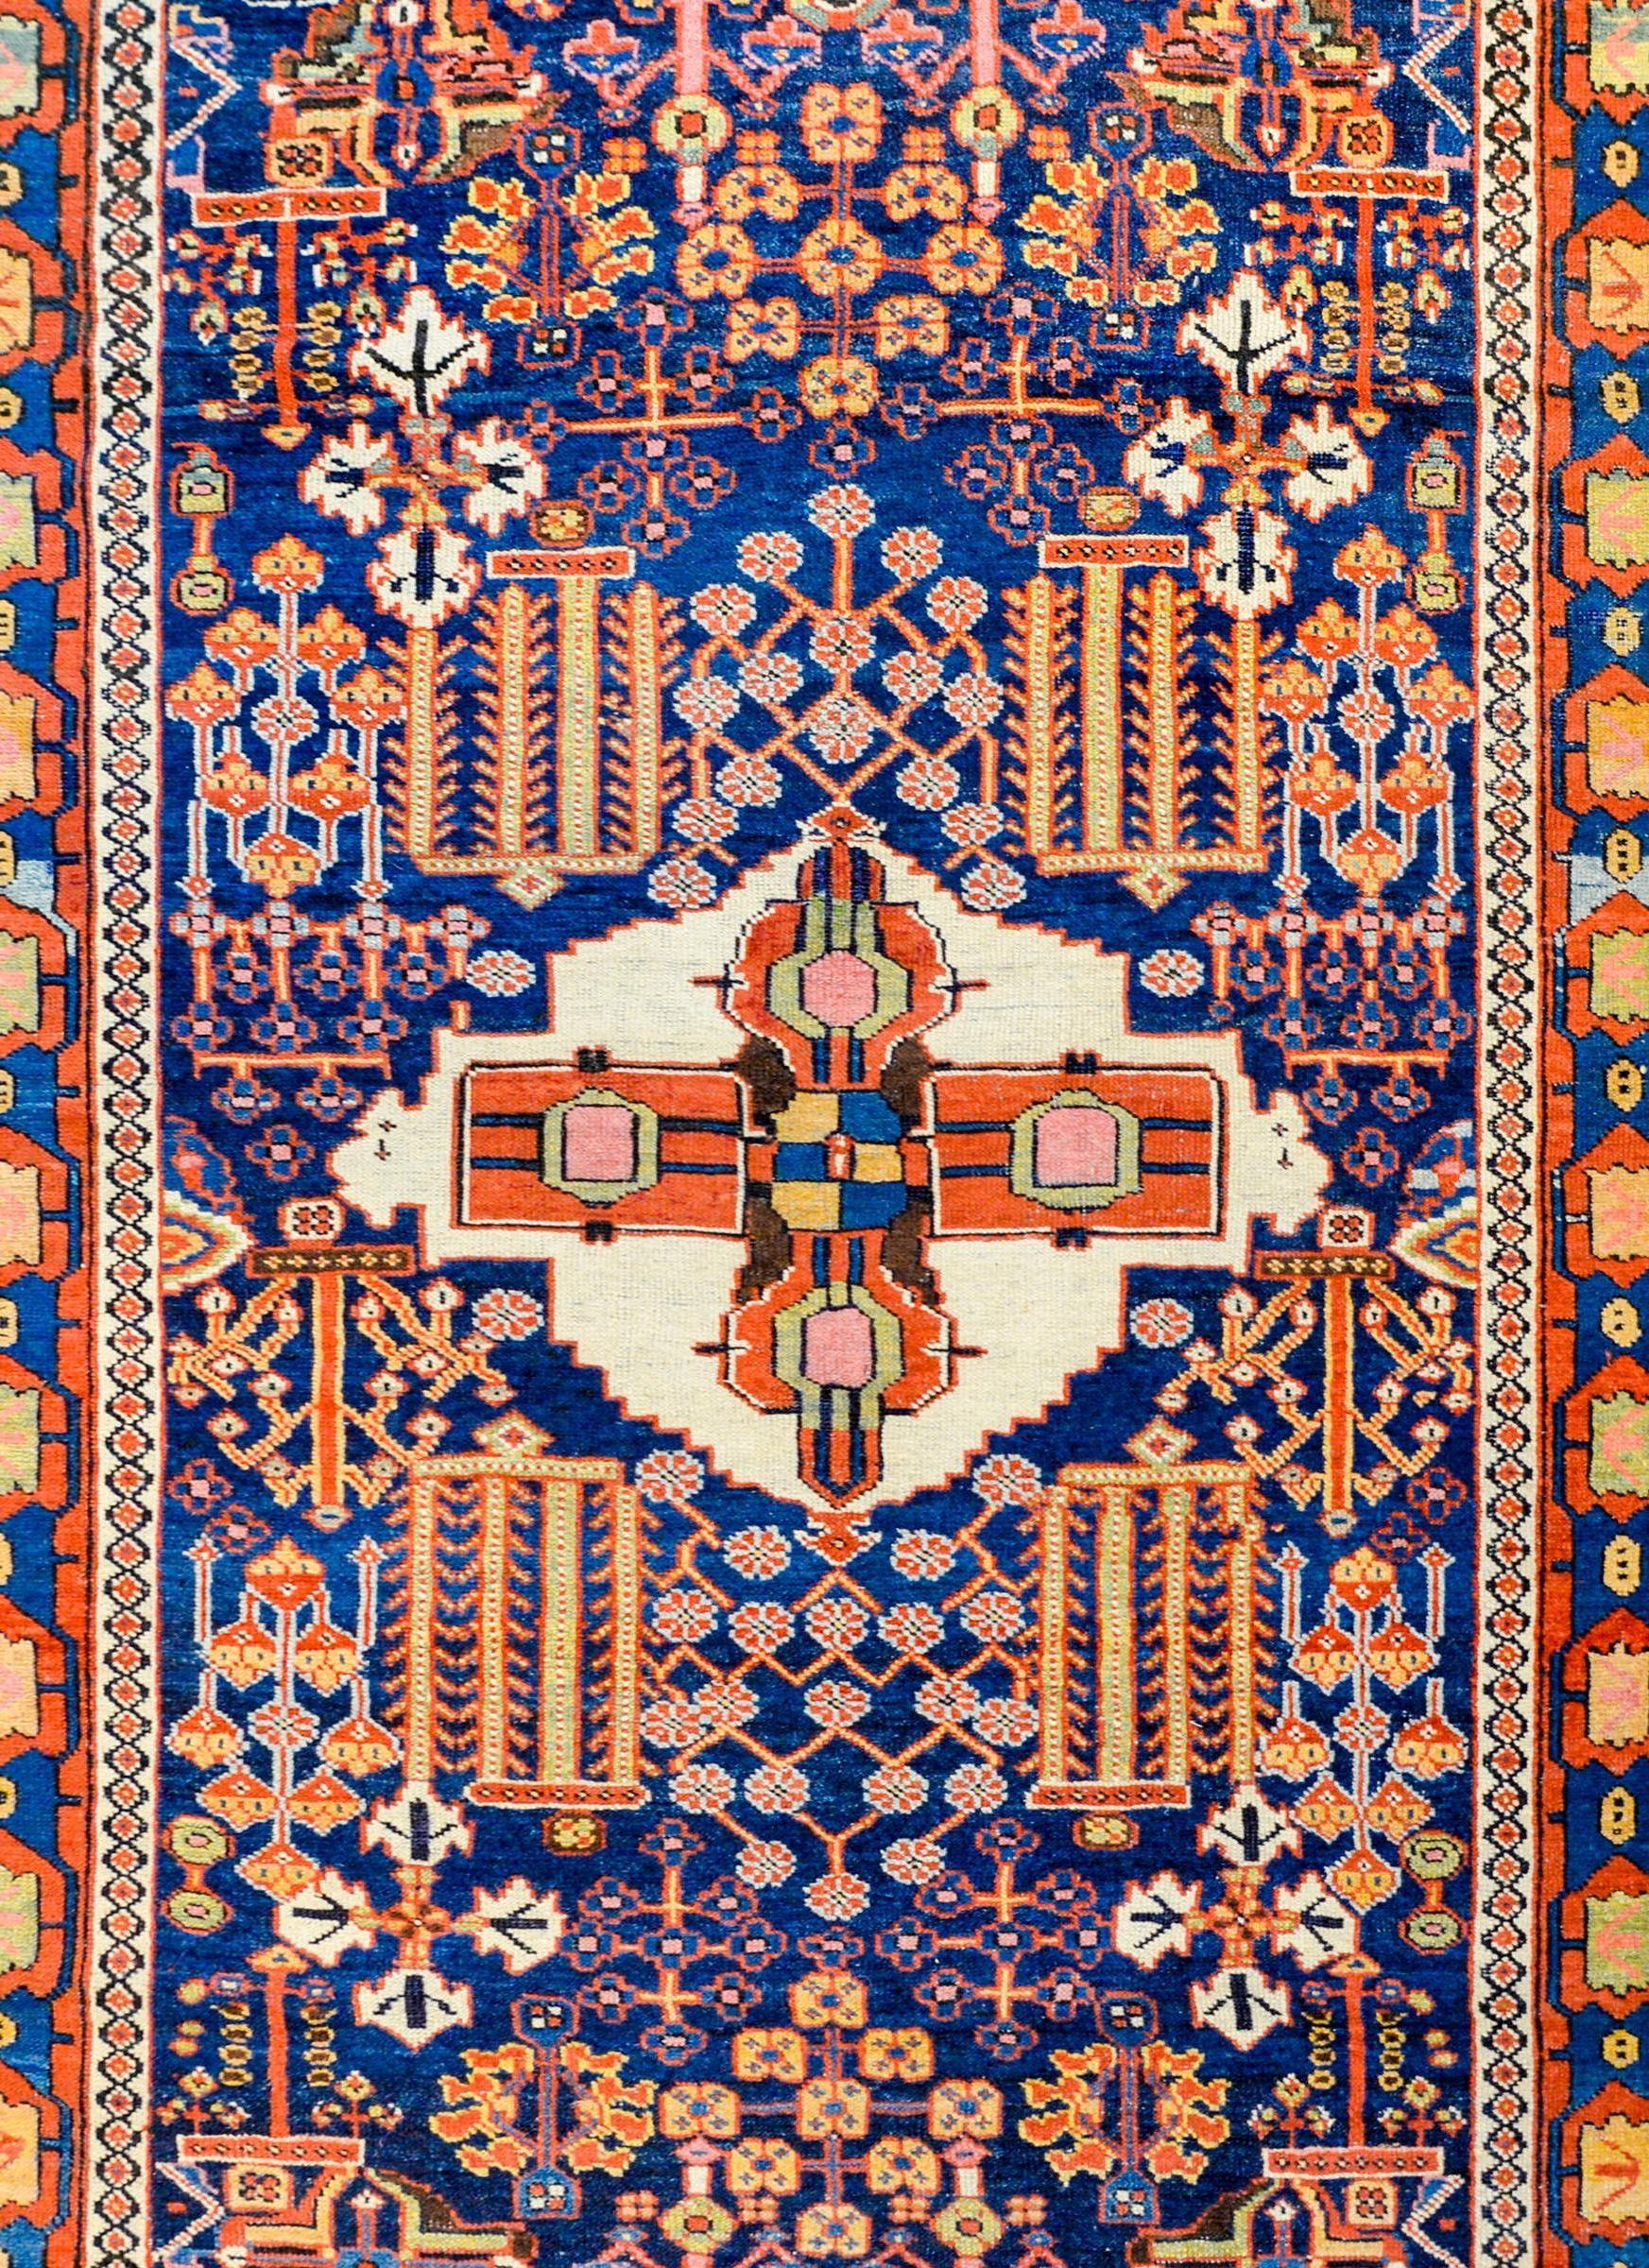 An exquisite late 19th century Azari rug with a fantastic bold tribal pattern containing a large central medallion with stylized flowers on a white background, amidst a field of mirrored myriad flowers and branches on a dark indigo background. The